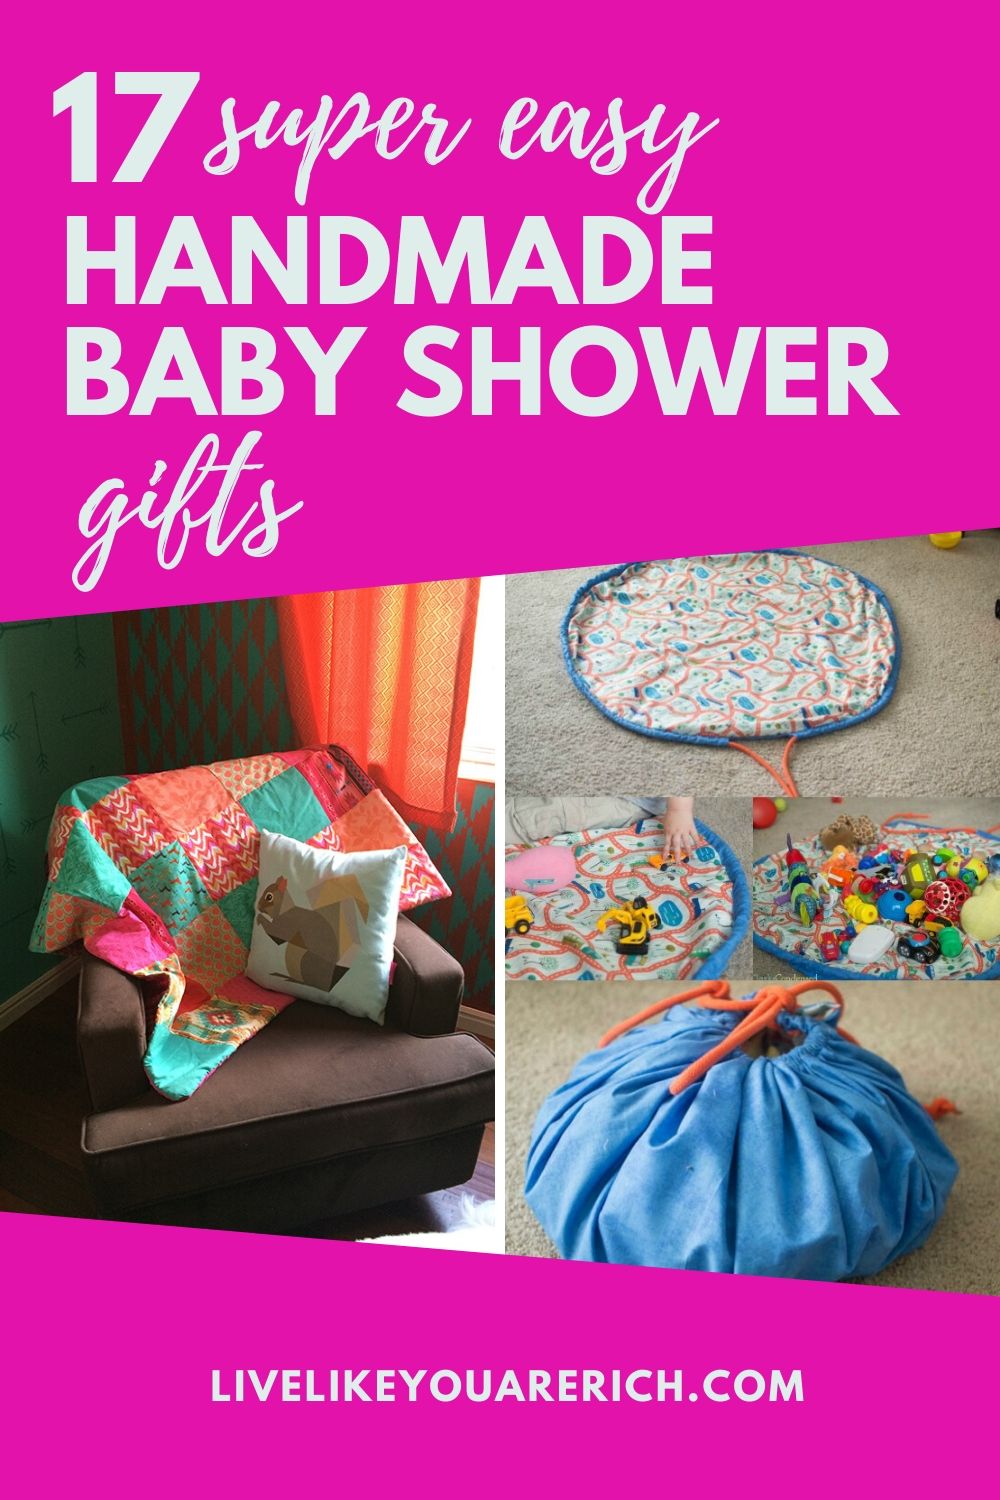 There are so many fun ways to celebrate the upcoming arrival of a baby. Making custom gifts is one of them. Sharing these 17 great handmade baby items/gifts that can show your excitement for a new baby.